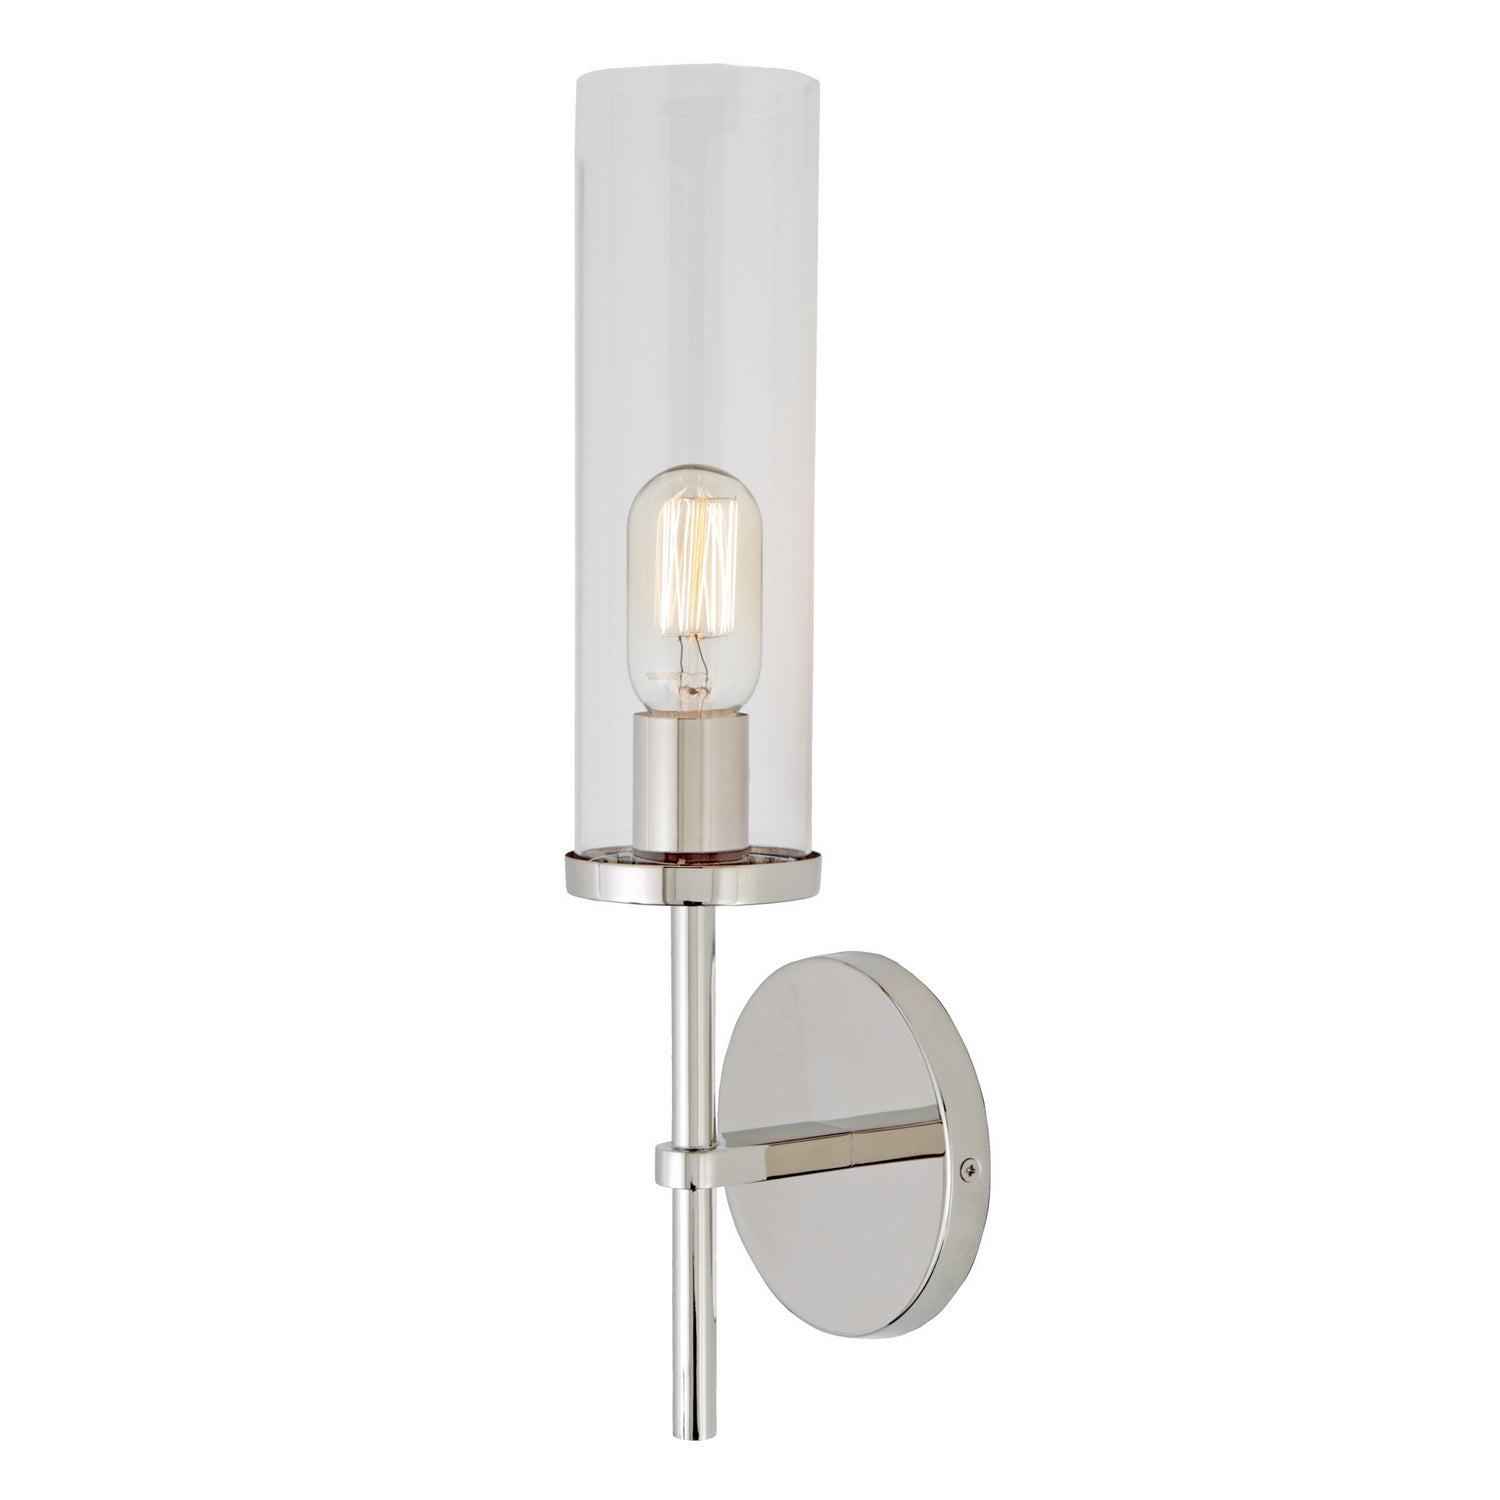 JVI Designs - 1277-15 - One Light Wall Sconce - Alford - Polished Nickel